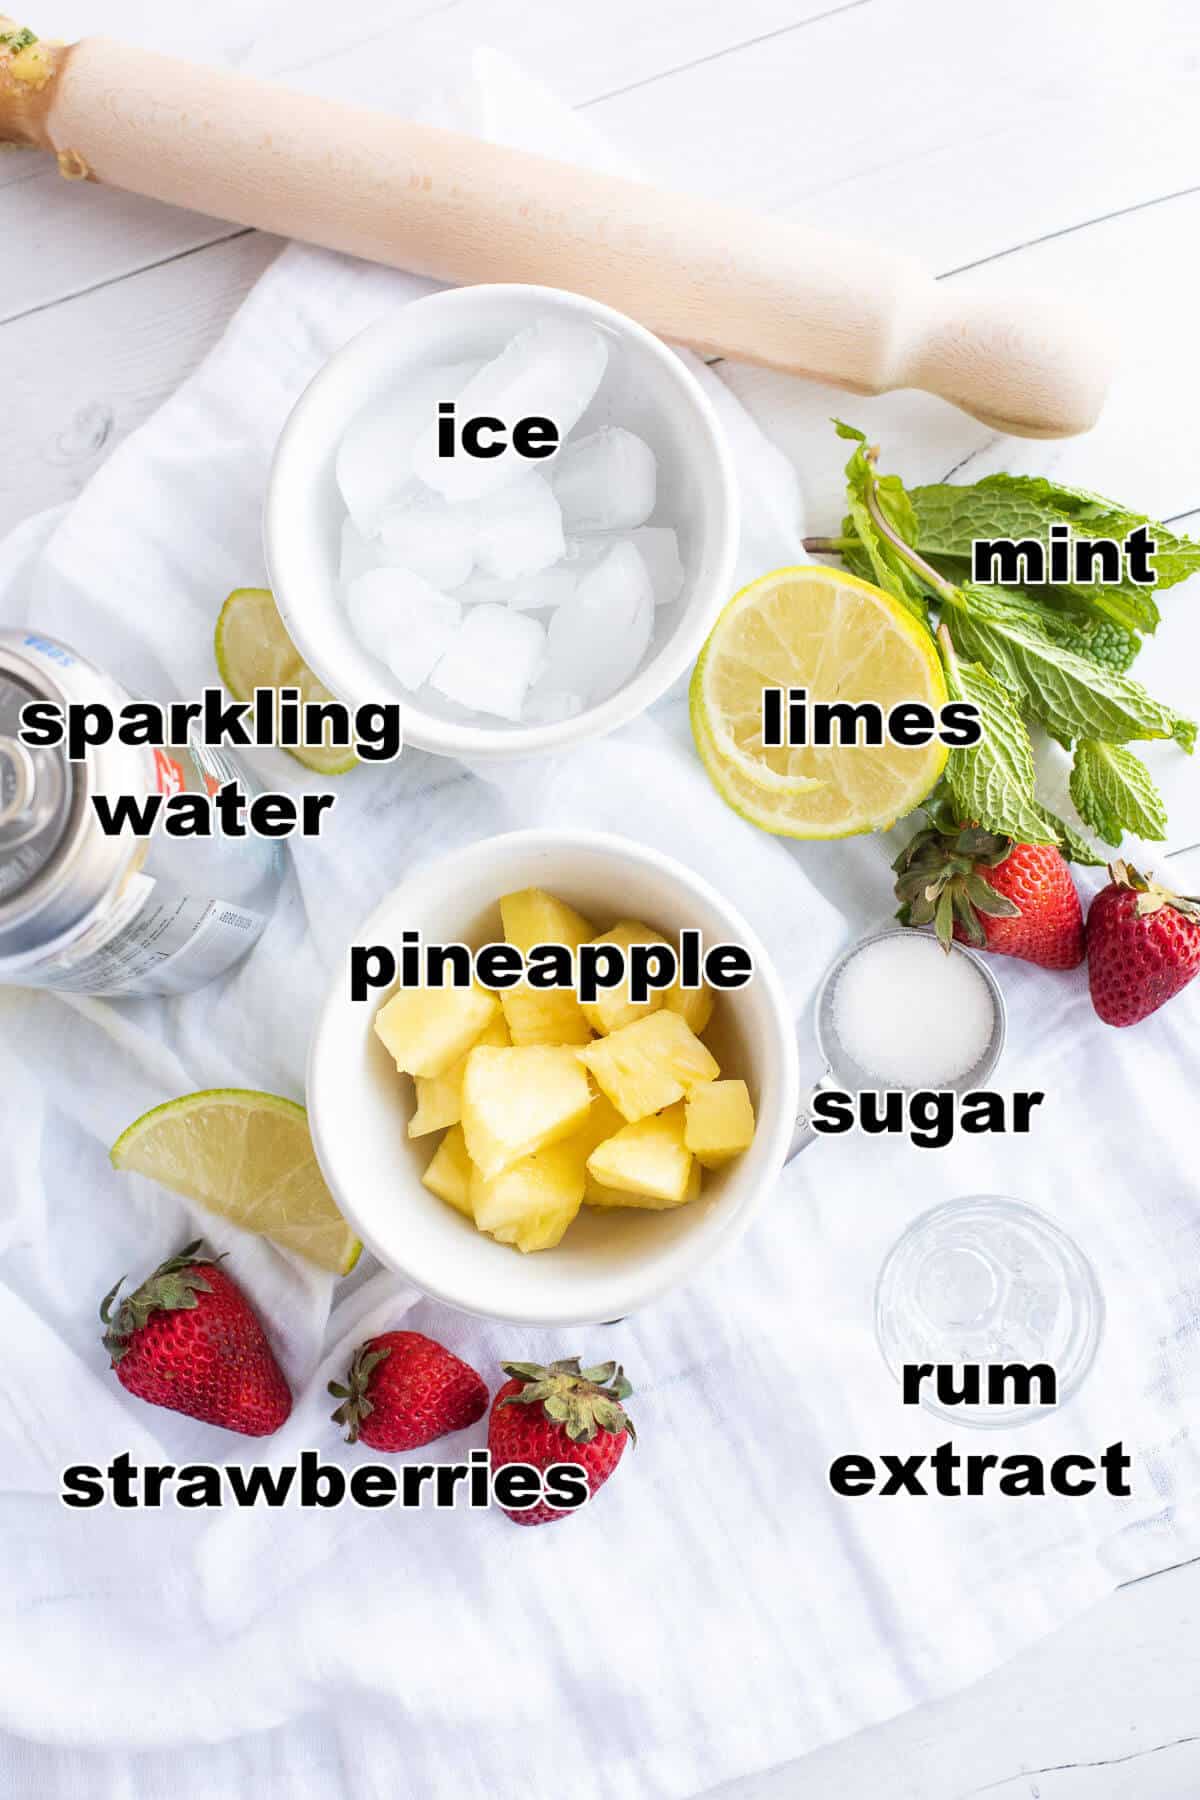 Ingredients for Strawberry Pineapple Mojito Mocktail: ice, sparkling water, pineapple, strawberries, lime, mint, sugar, and rum extract.